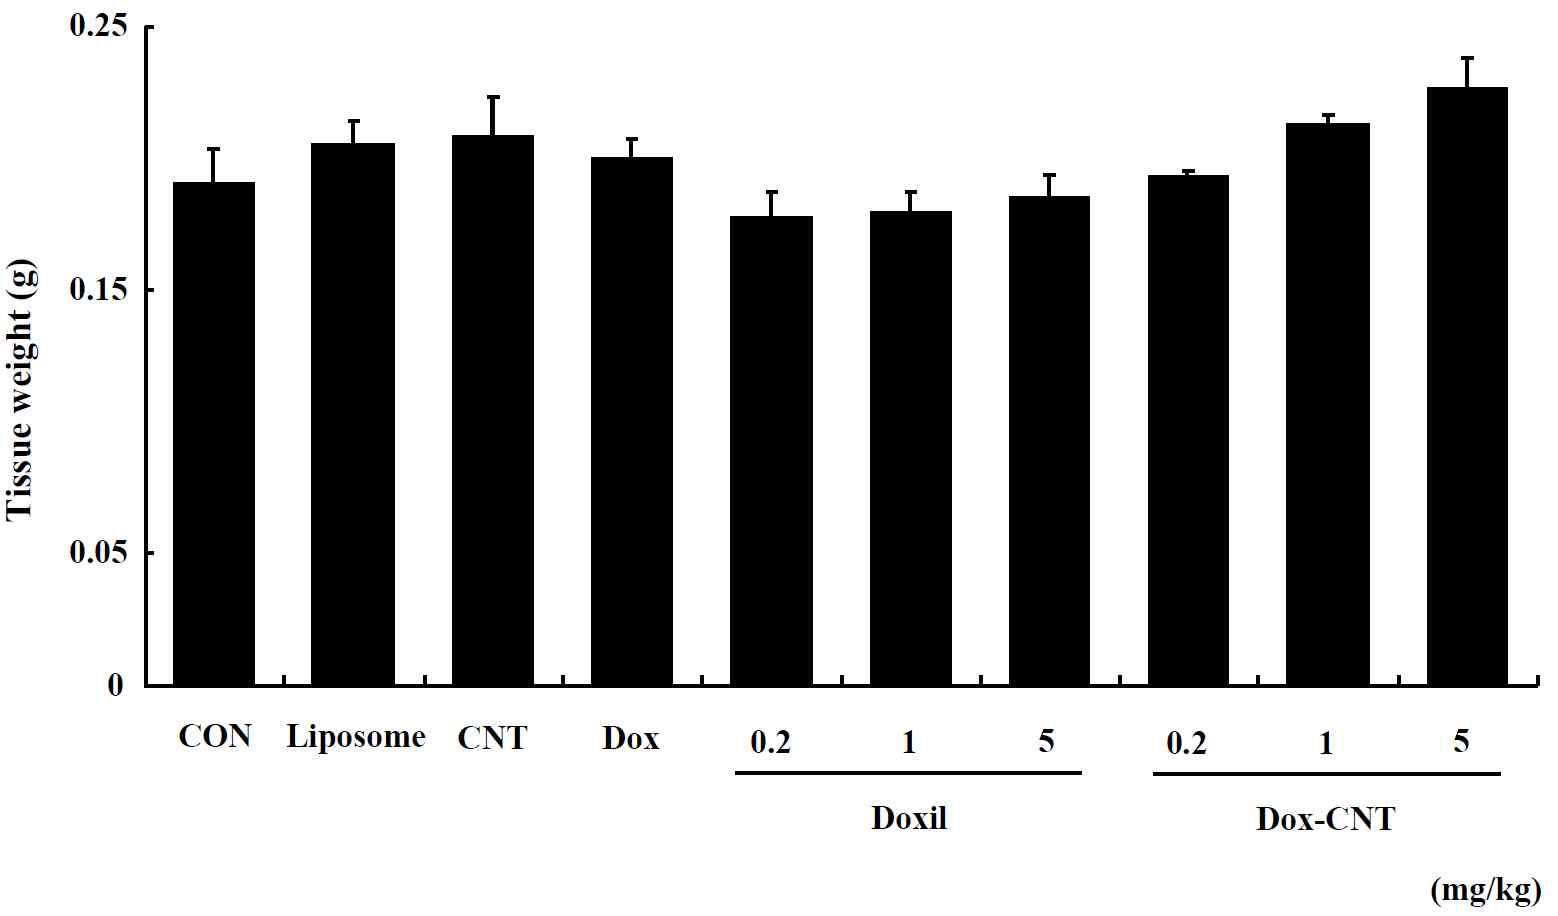 The change of Lung weight in single exposed male ICR mice for 14 days. Mice were respectively administered by intravenous injection with liposome, CNT, Dox, Doxil (0.2, 1, 5 mg/kg) and Dox-CNT (0.2, 1, 5 mg/kg). The results are presented as mean ± SE (n = 10). * p < 0.05, significantly different from the control